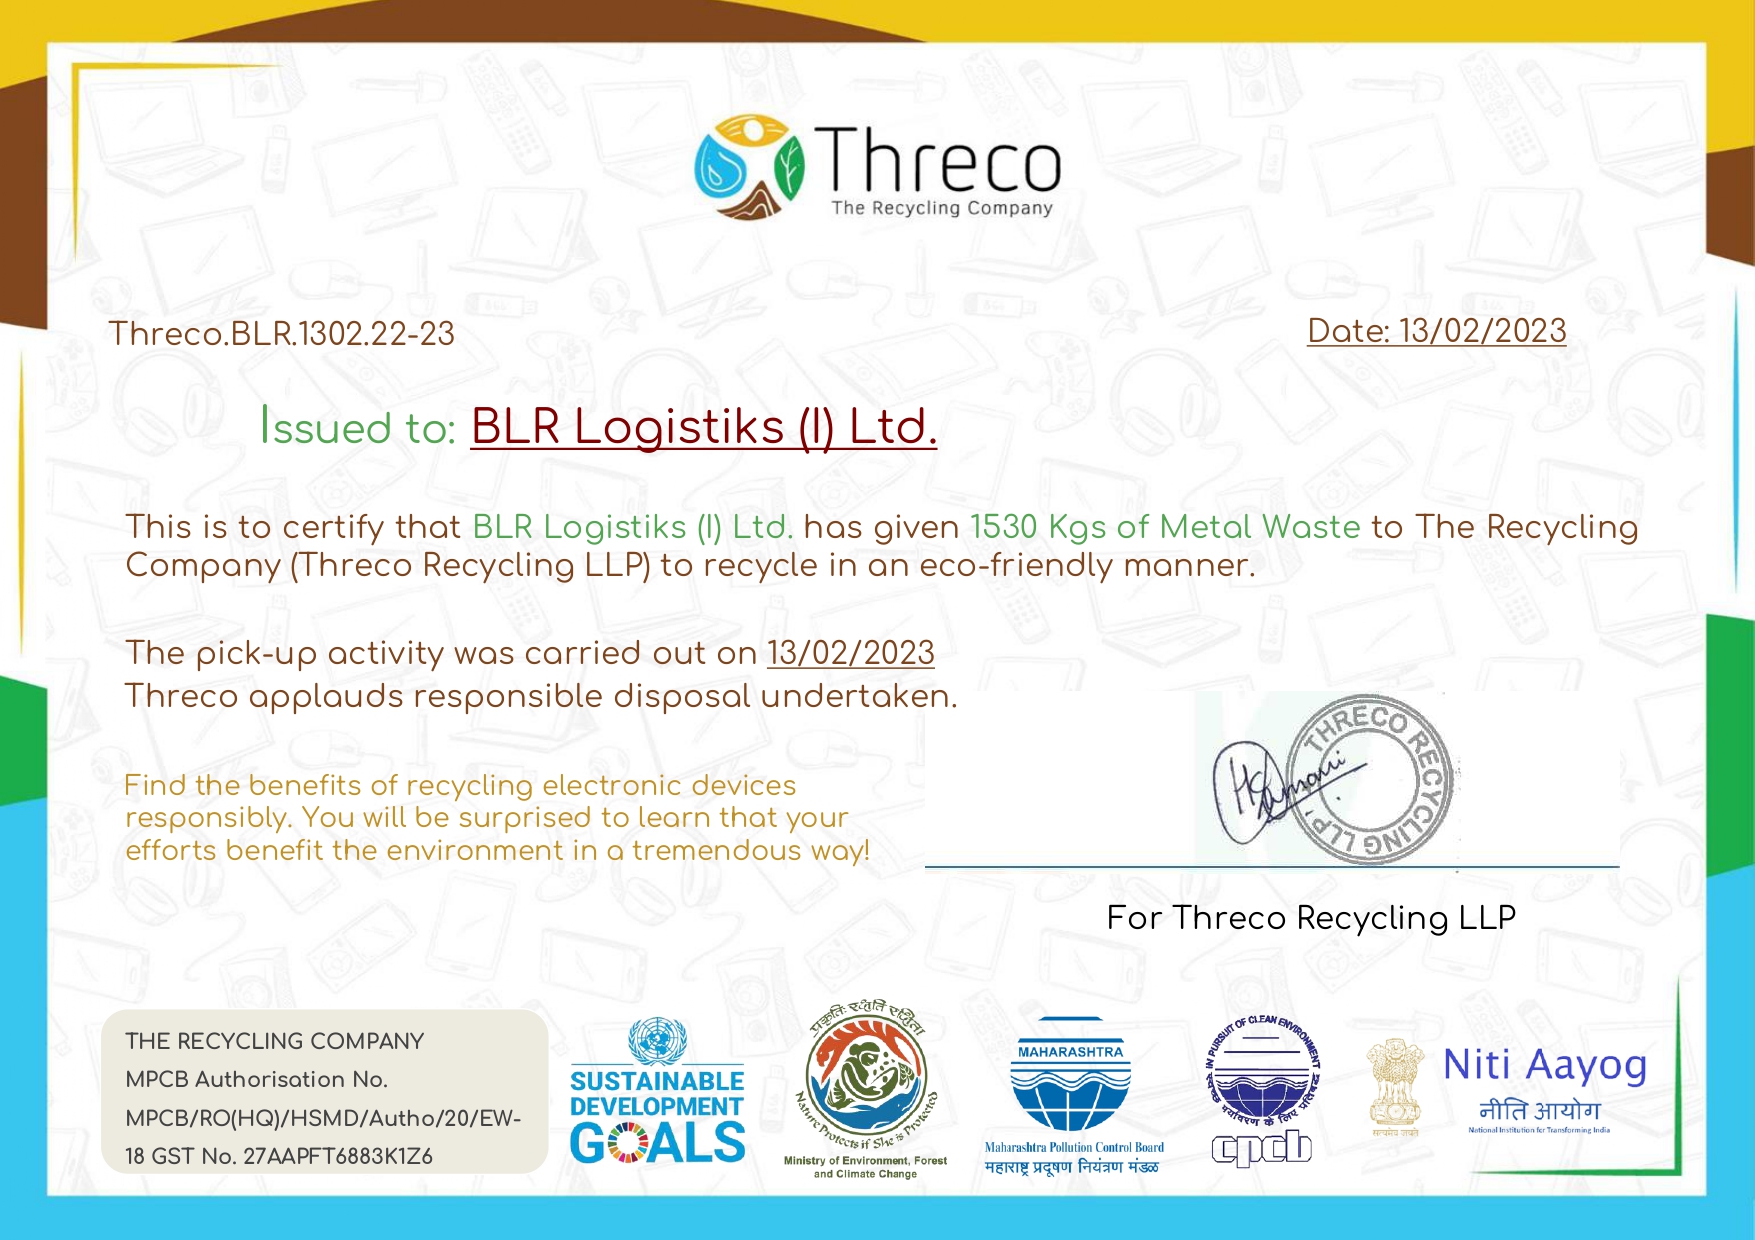 BLR Logistiks Certificate For Recycling 1530 Kgs Of Metal Wase In A Eco-Friendly Manner